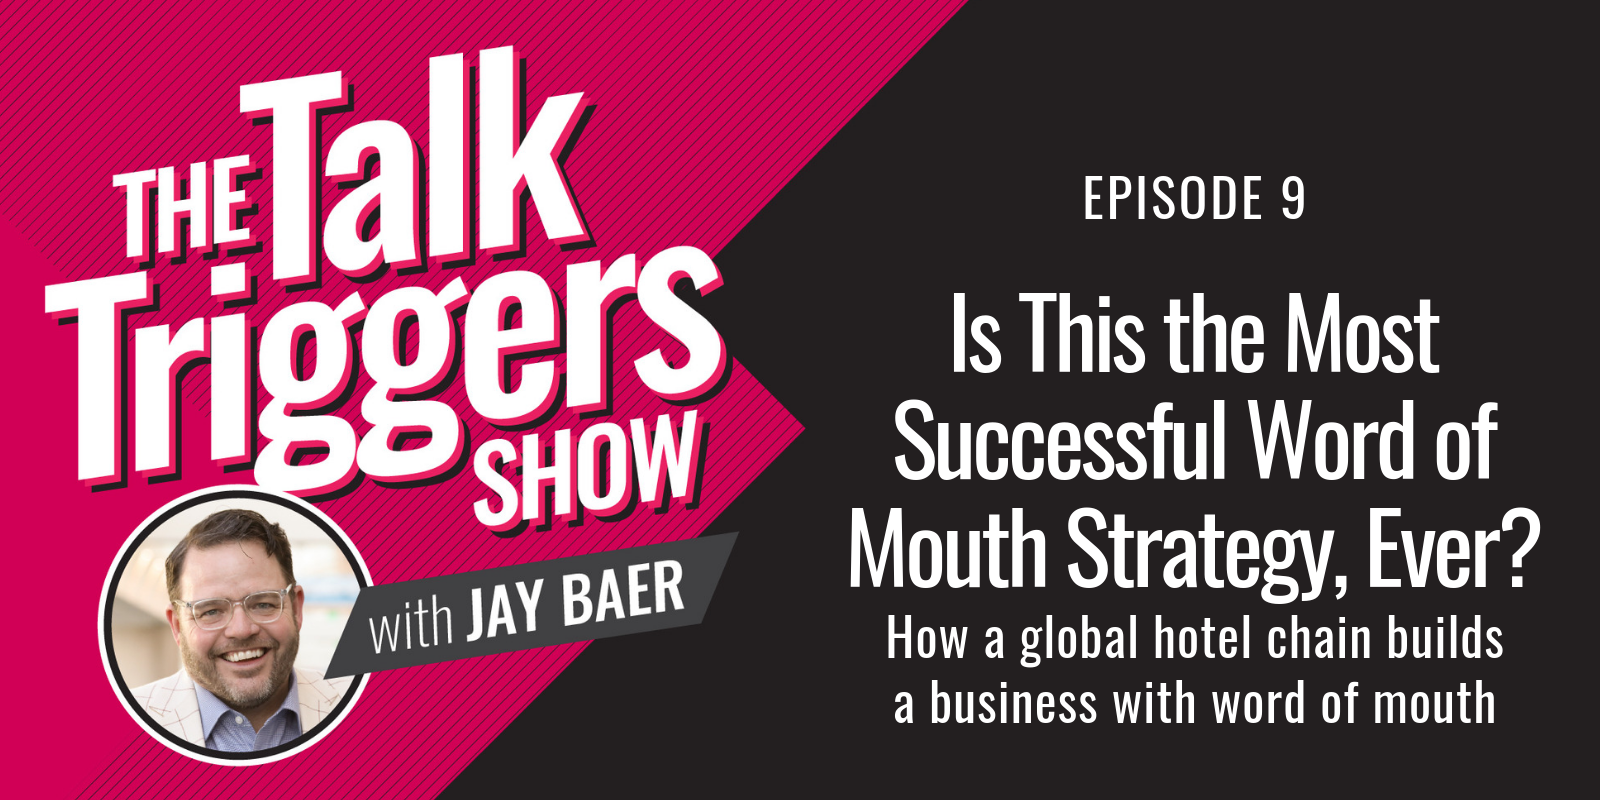 Is This the Most Successful Word of Mouth Strategy, Ever?